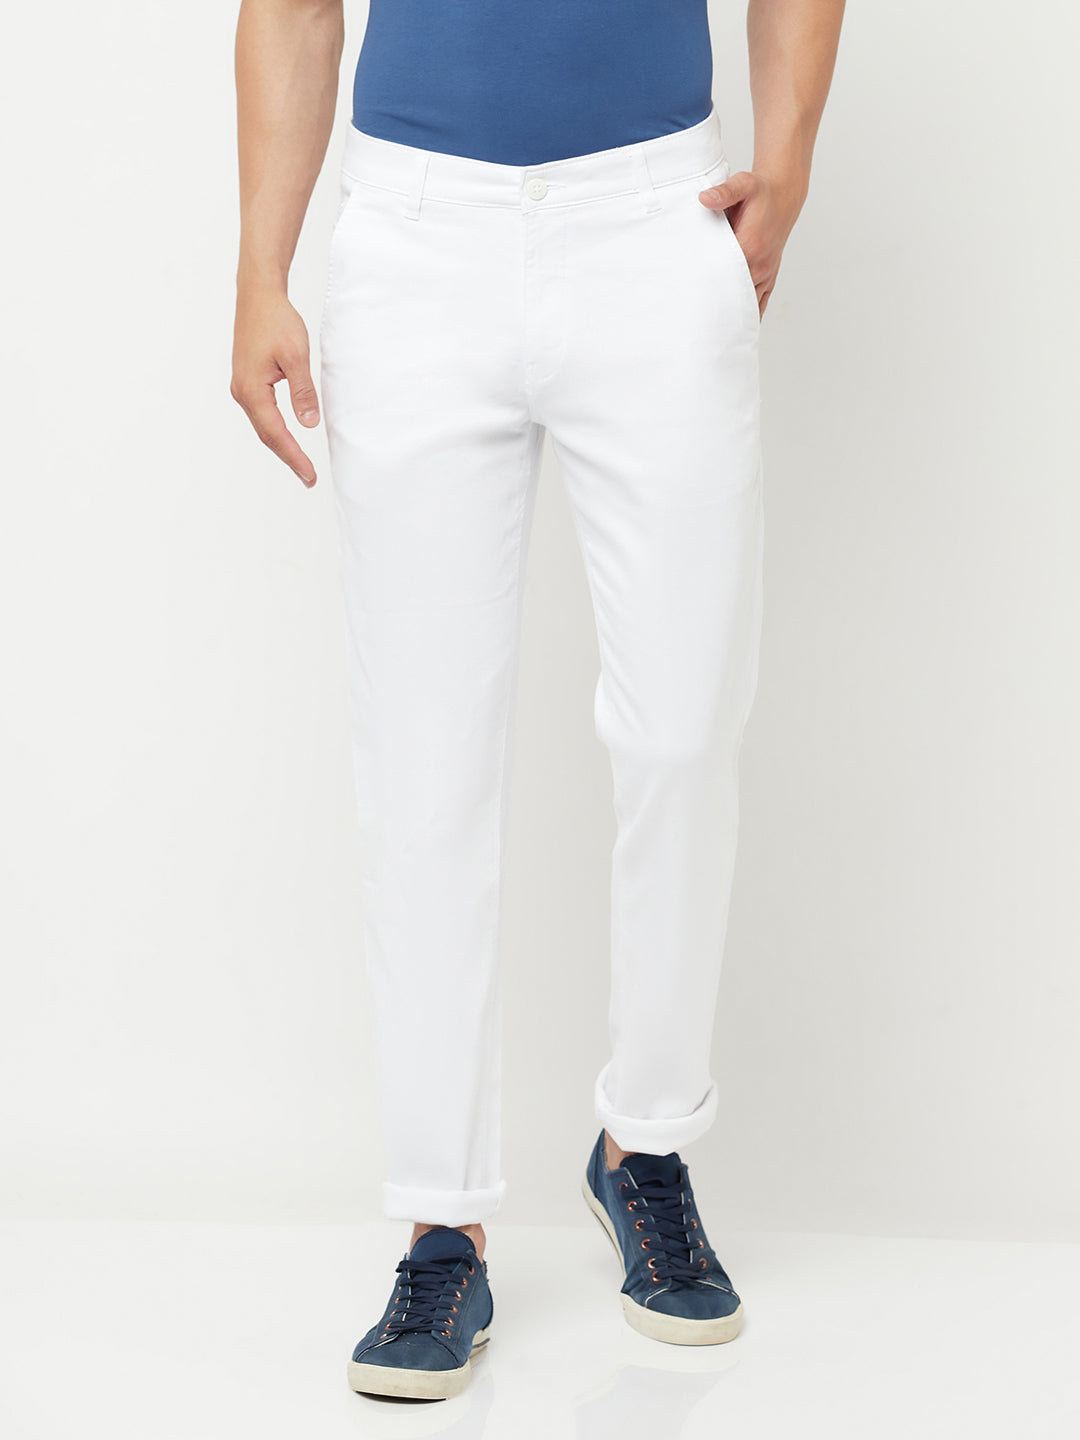 White Casual Trousers - Men Trousers